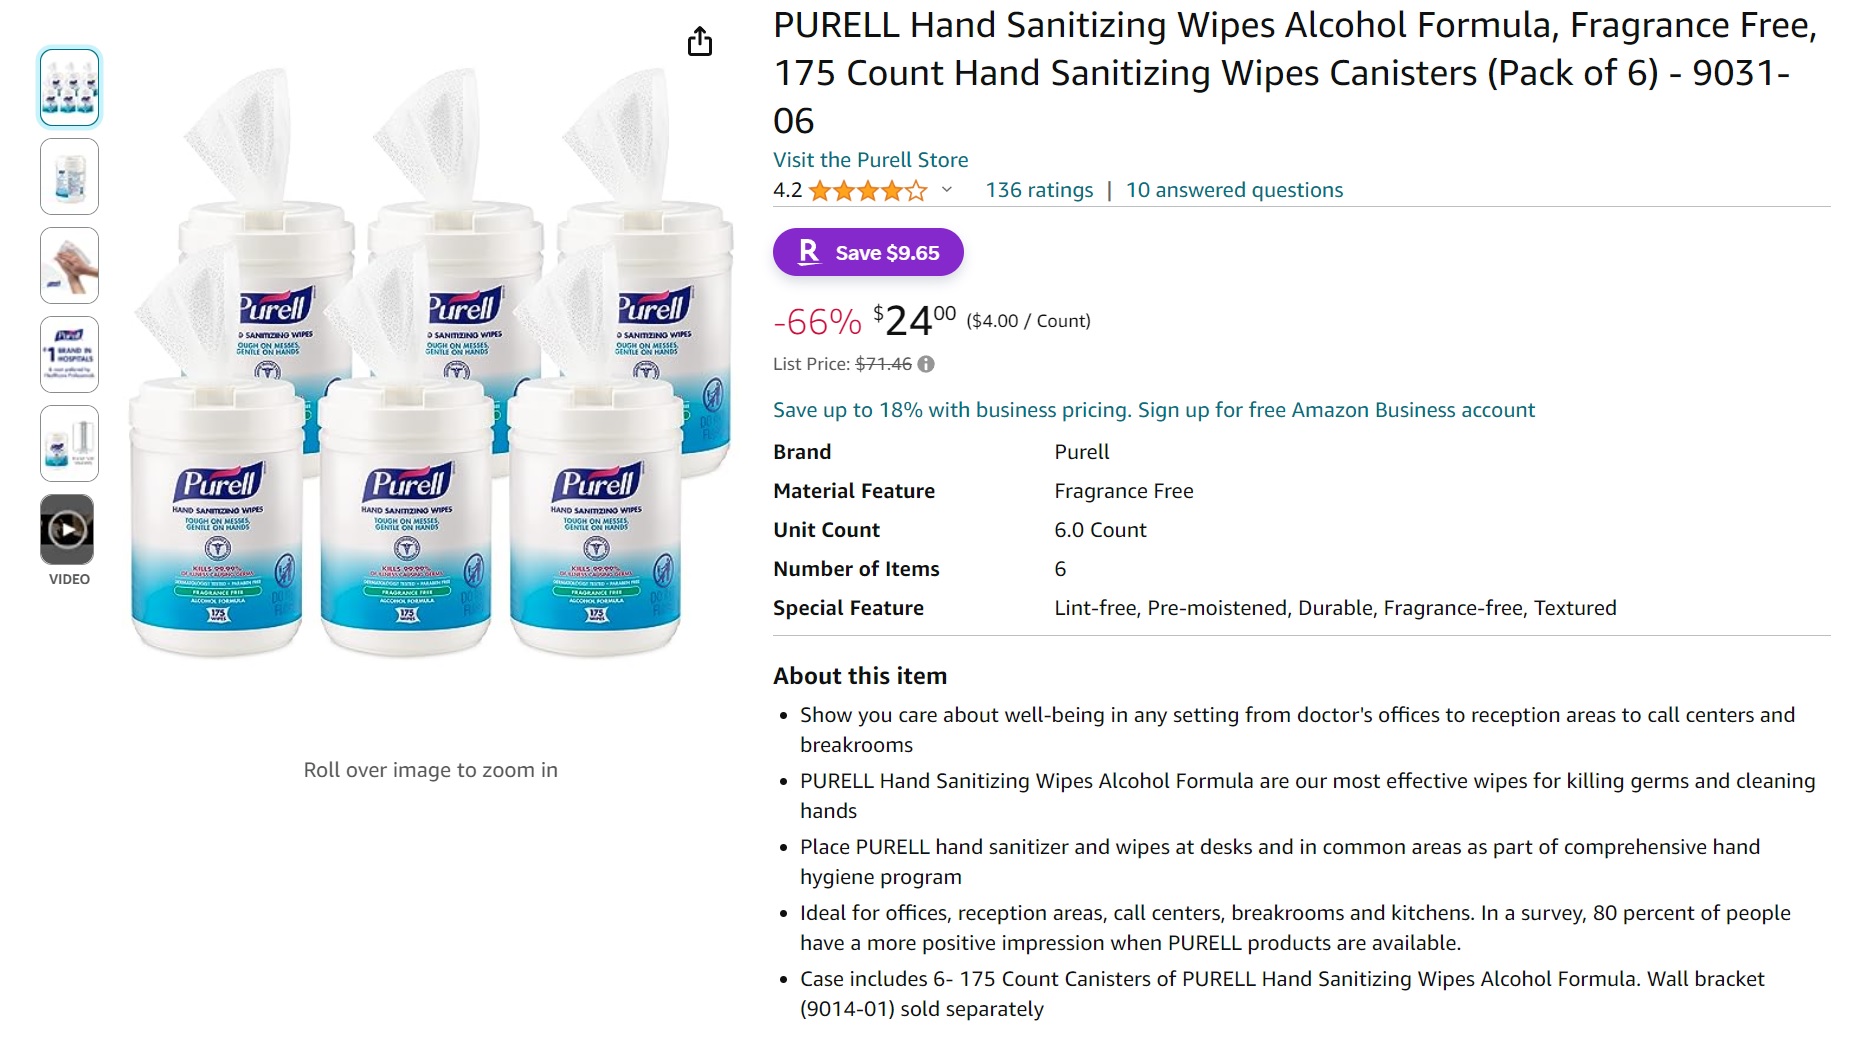 Amazon.com: PURELL Hand Sanitizing Wipes Alcohol Formula, Fragrance Free, 175 Count Hand Sanitizing Wipes Canisters (Pack of 6) - 9031-06 : Health &amp; Household